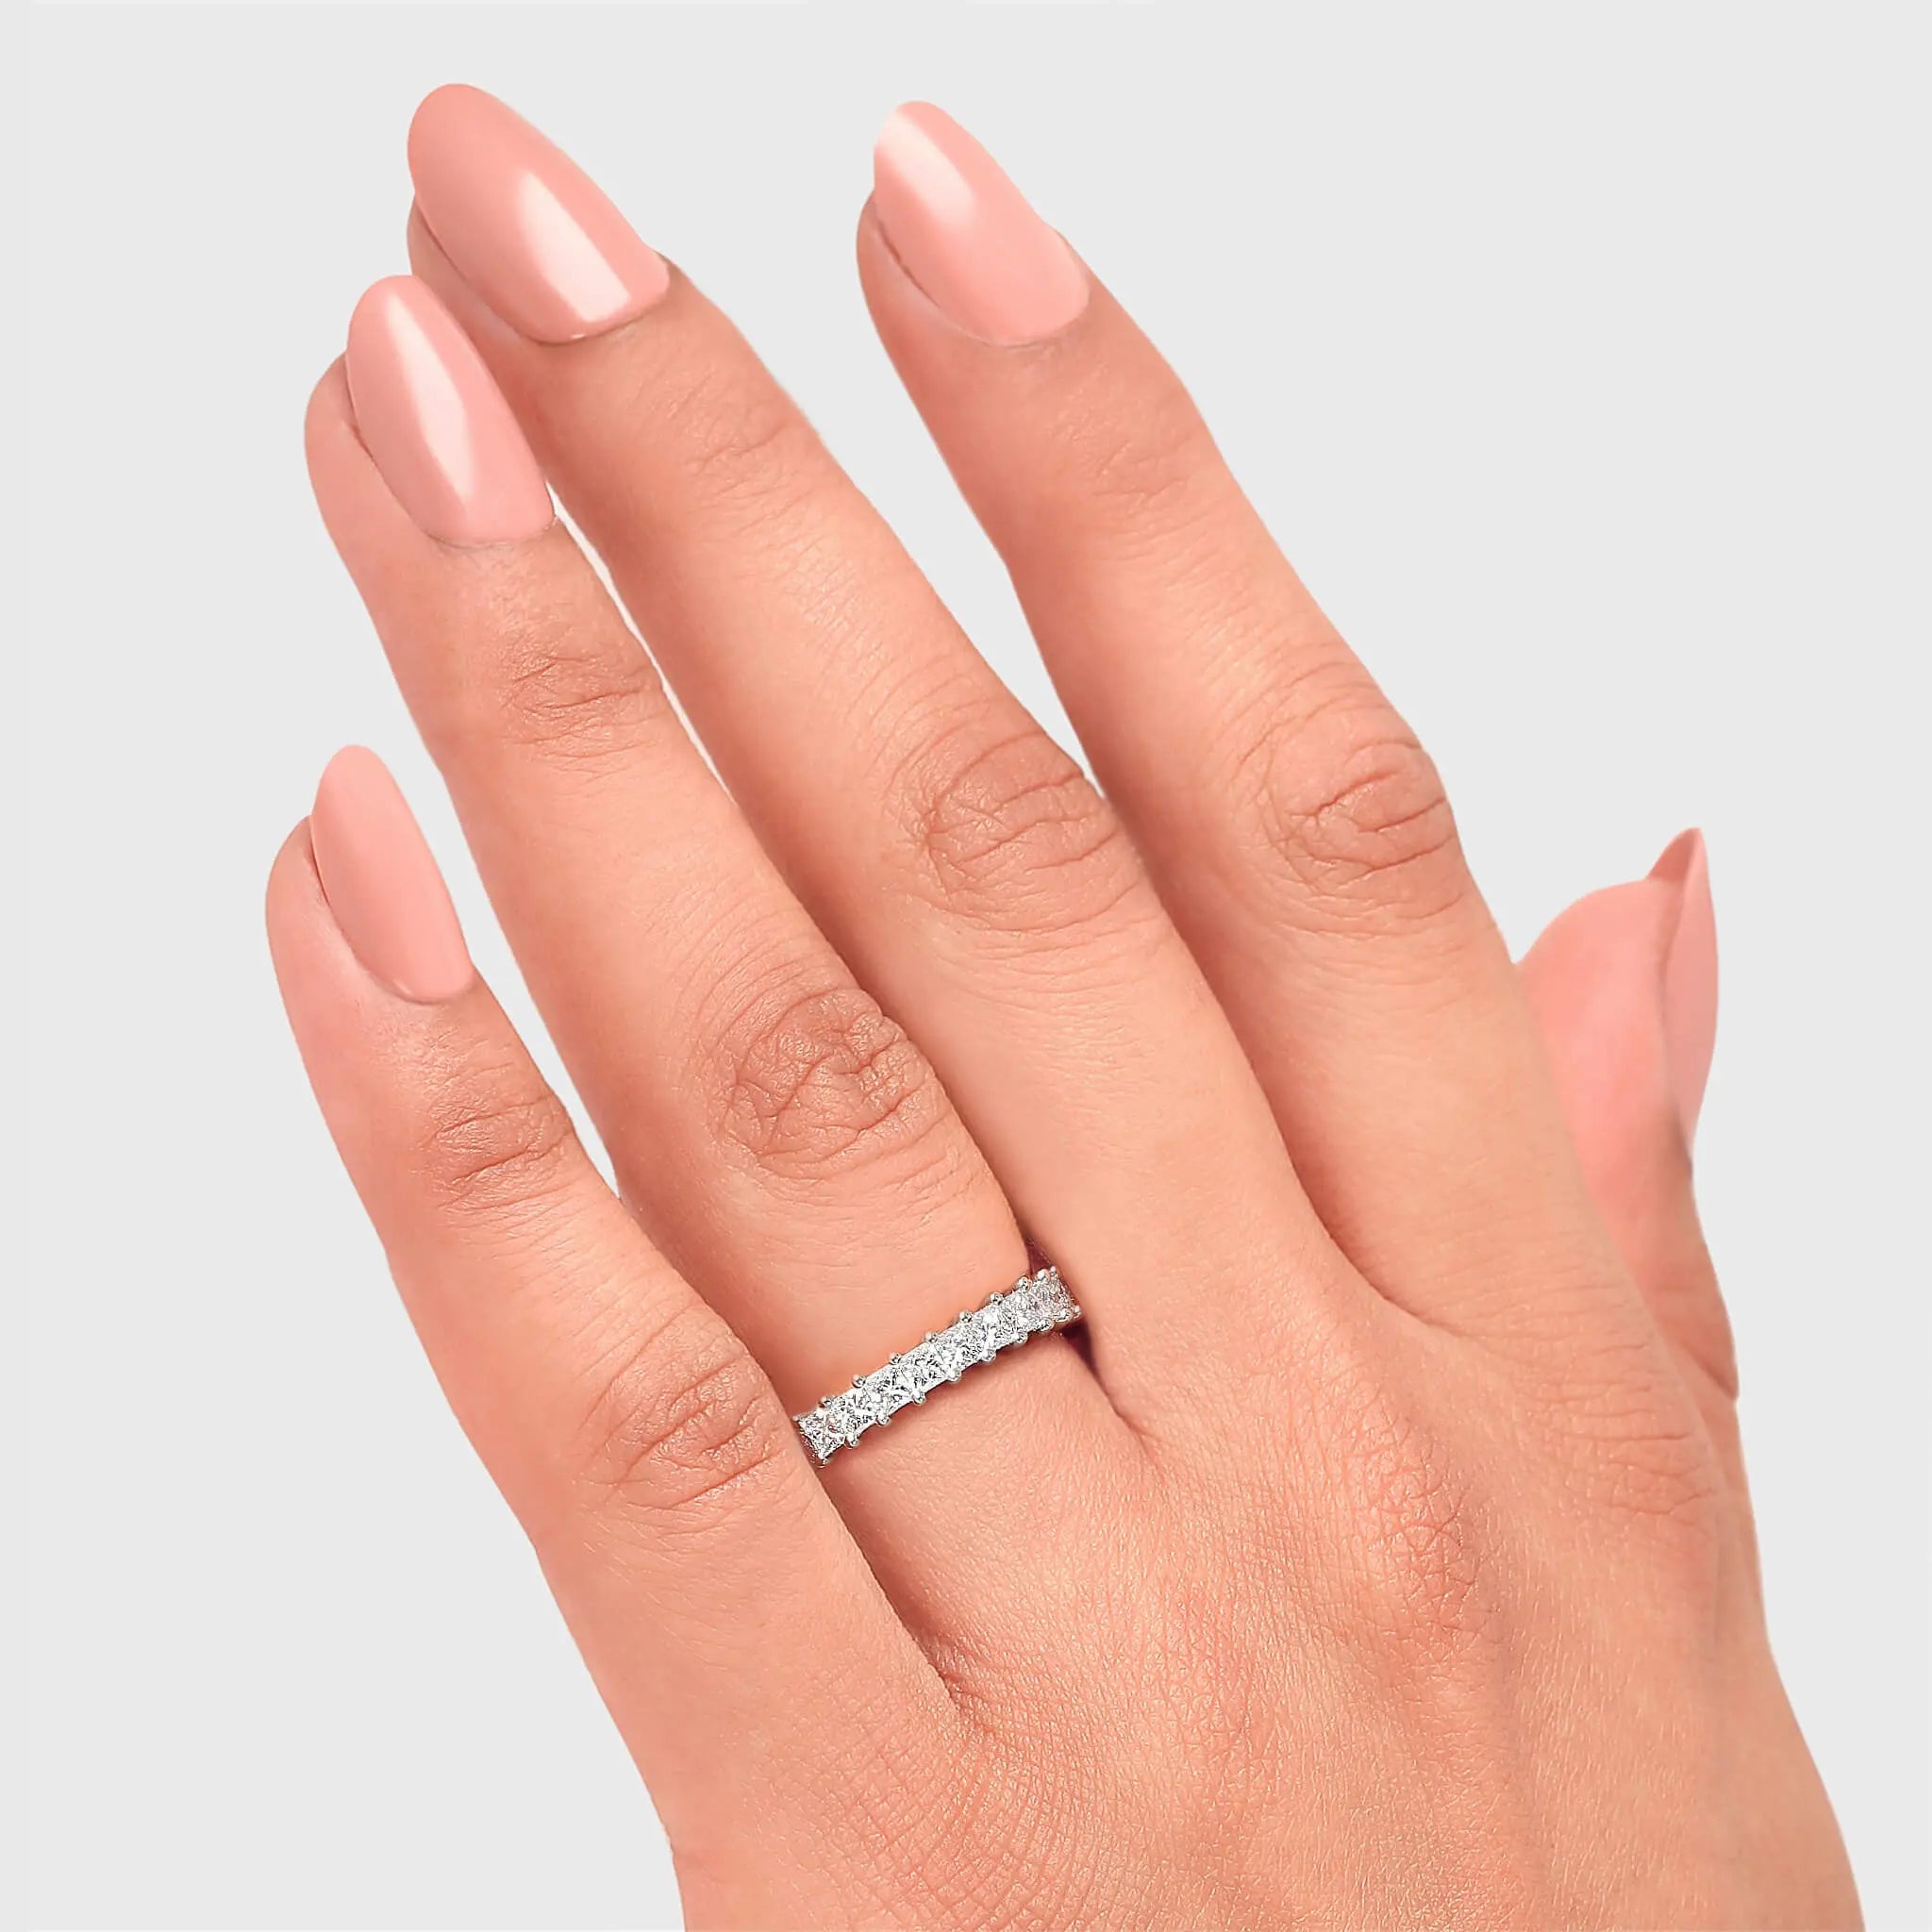 Shimansky - Women Wearing the My Girl Claw set Full Eternity Diamond Ring 2.00ct Crafted in 18K White Gold